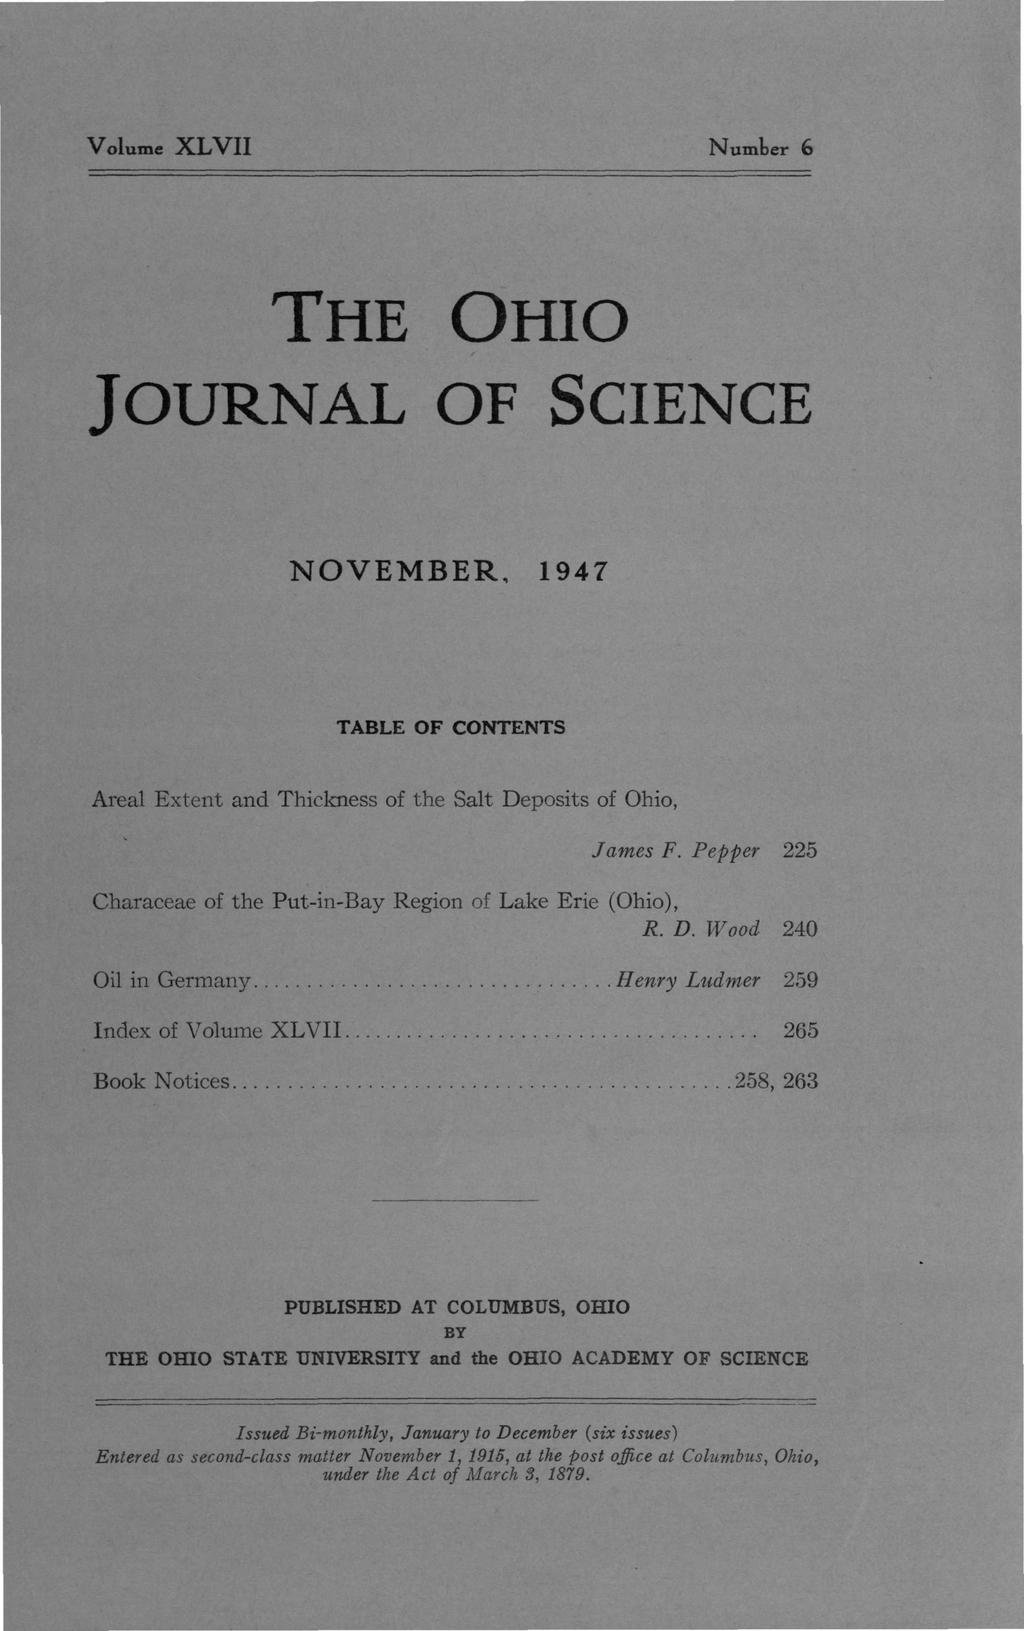 Volume XLVII Number 6 THE OHIO JOURNAL OF SCIENCE NOVEMBER, 1947 TABLE OF CONTENTS Areal Extent and Thickness of the Salt Deposits of Ohio, James F.